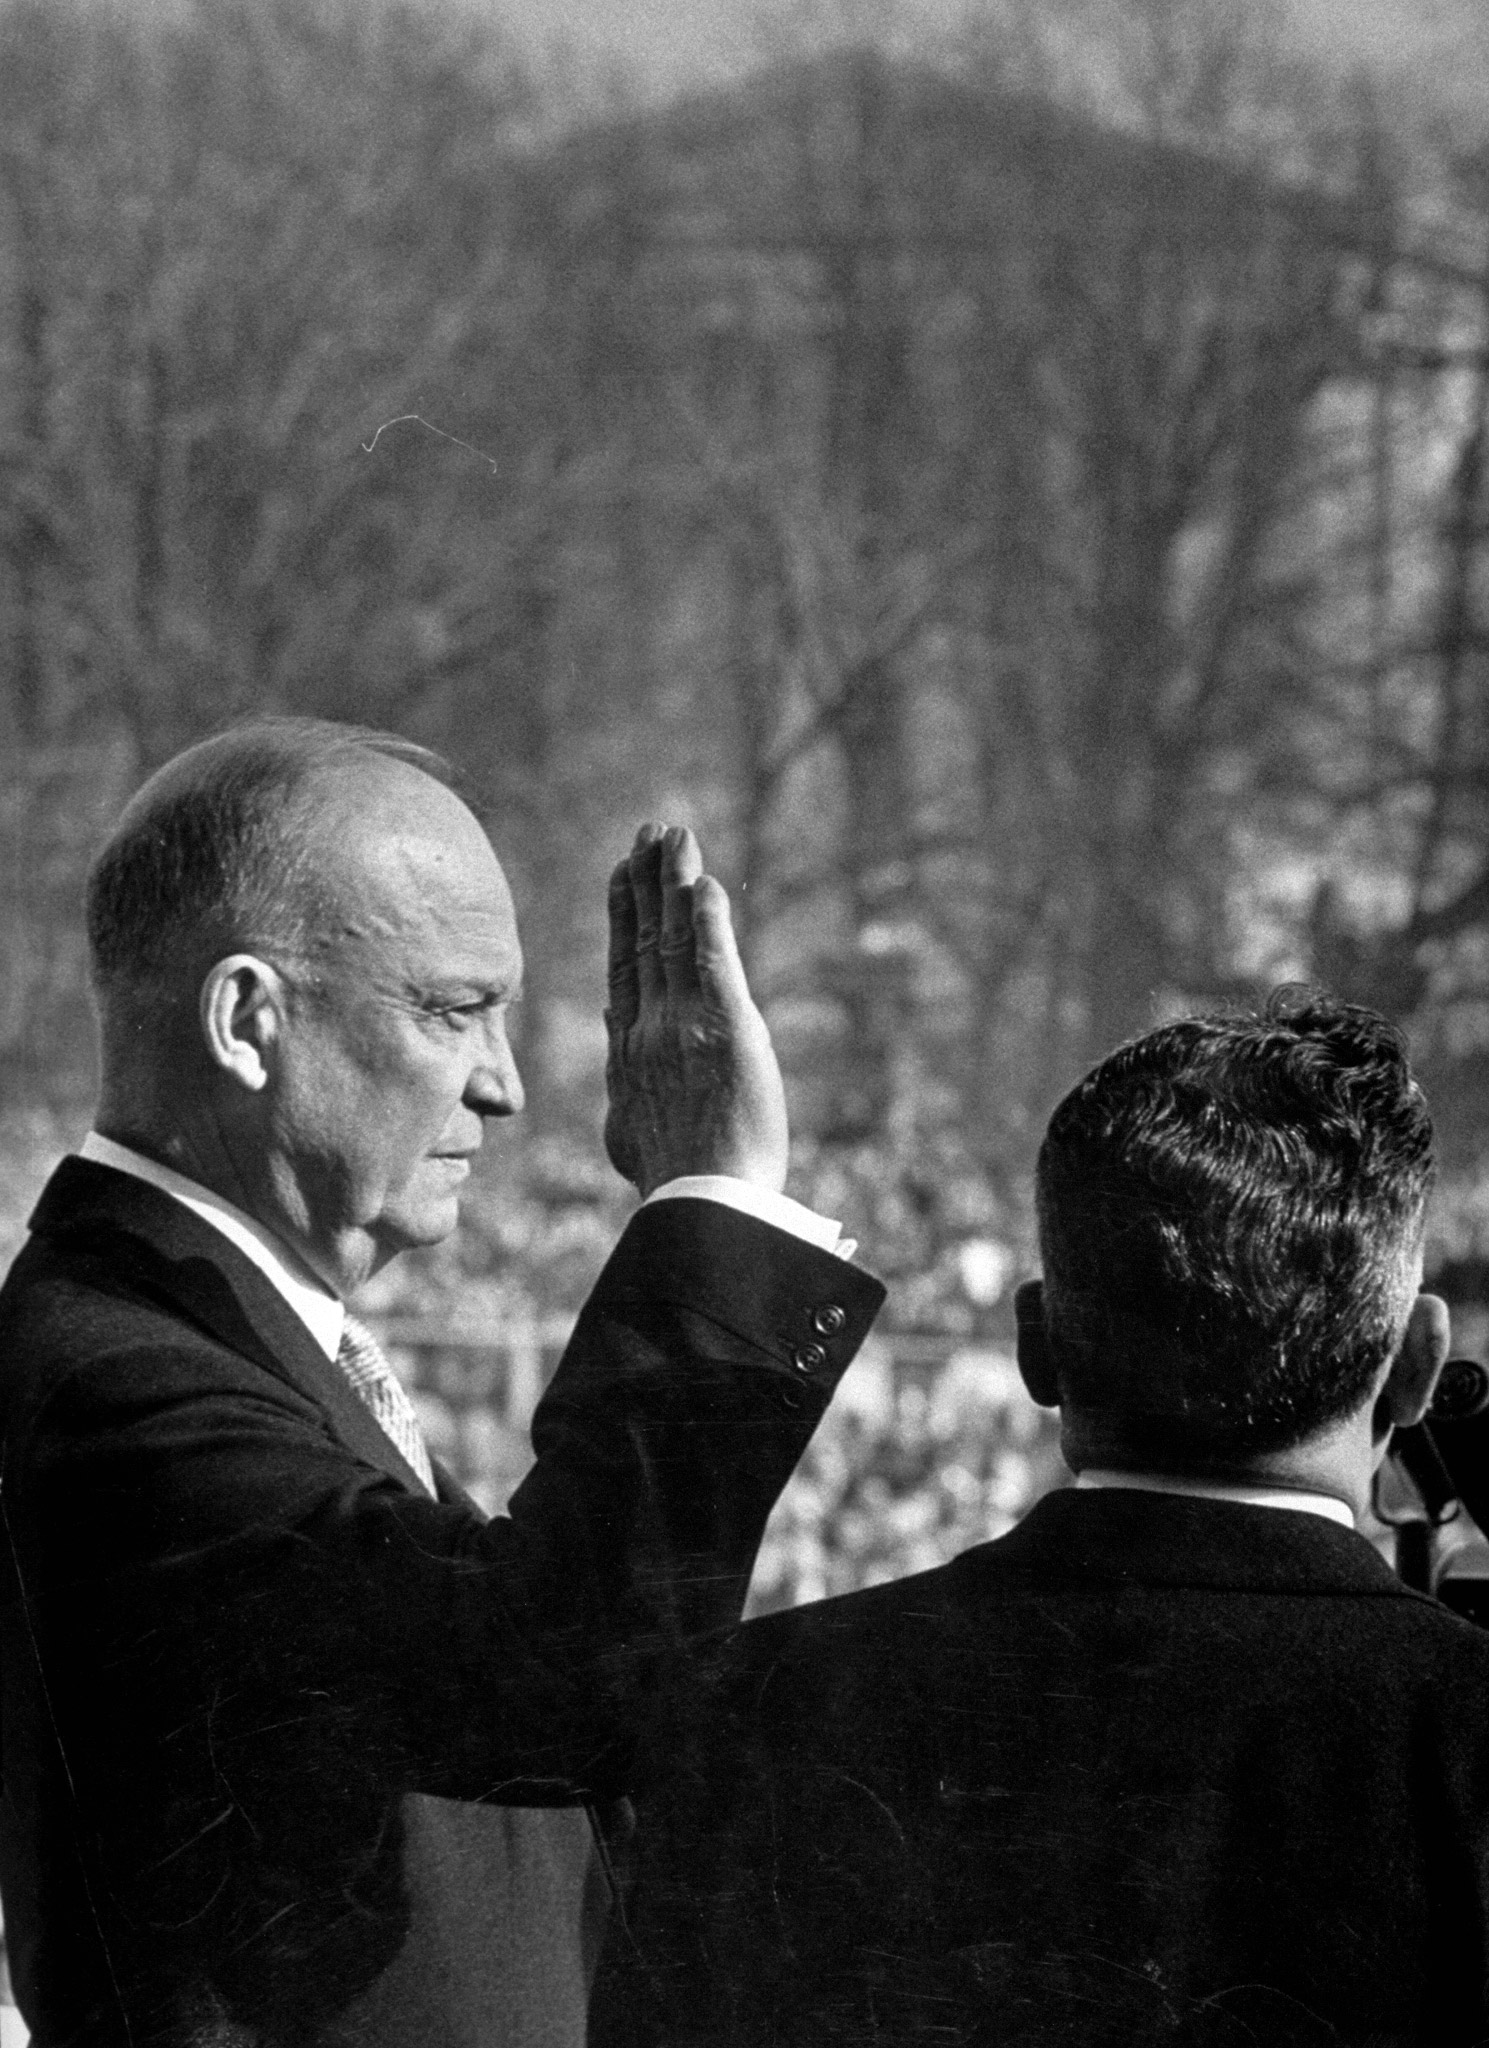 Dwight D. Eisenhower taking his first oath of office during inauguration, 1953.